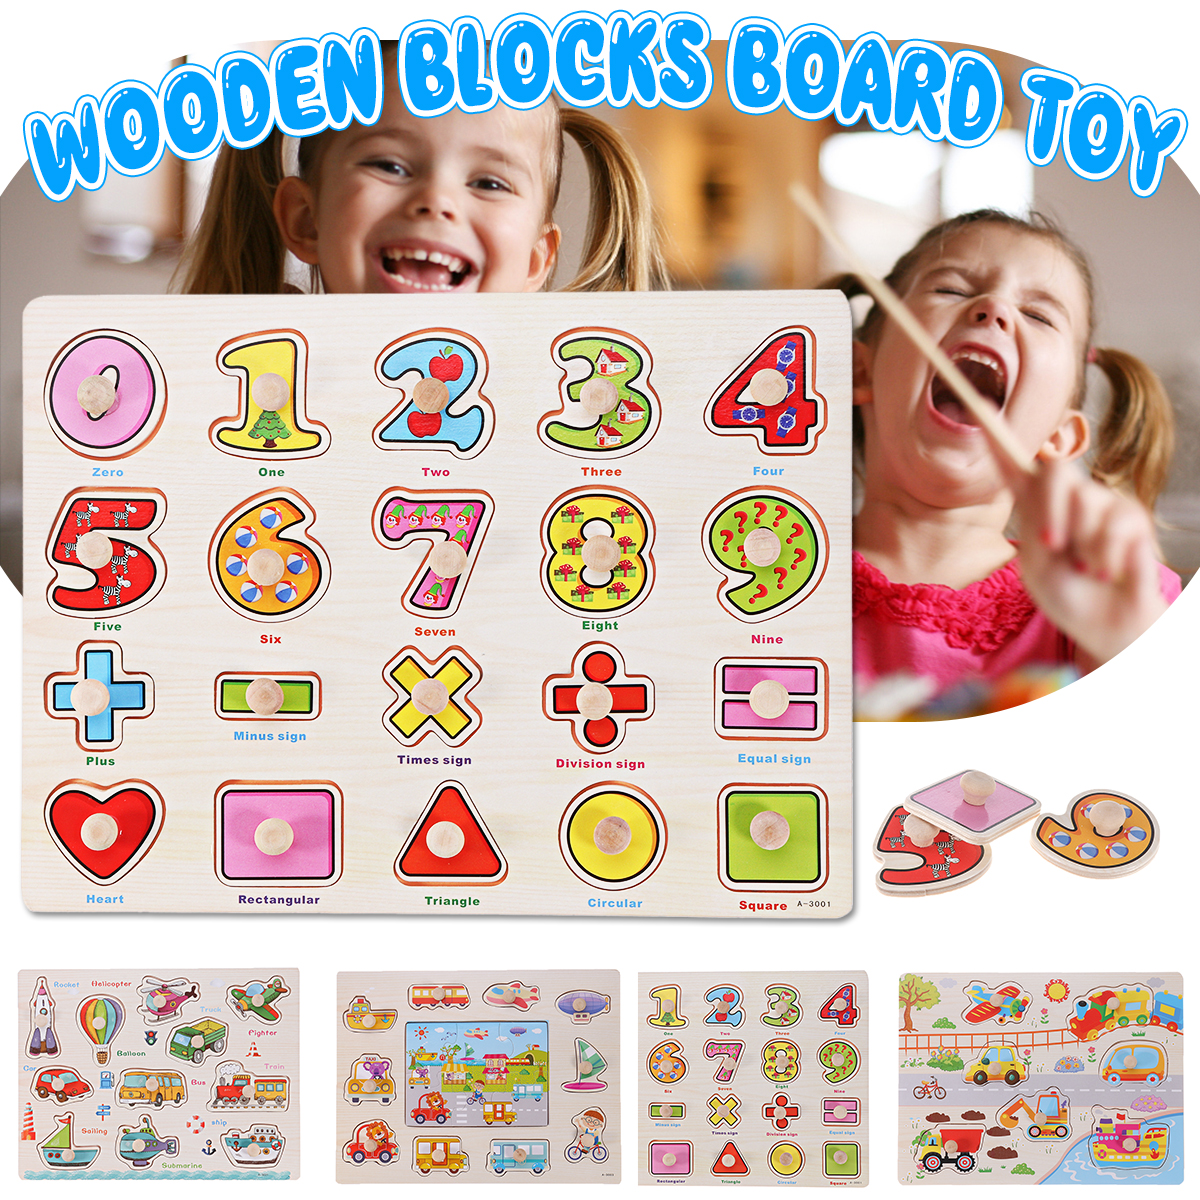 Wooden-Multi-style-Math-Jigsaw-Puzzle-Blocks-Board-Intelligence-Developing-Early-Education-Toy-for-K-1698283-2